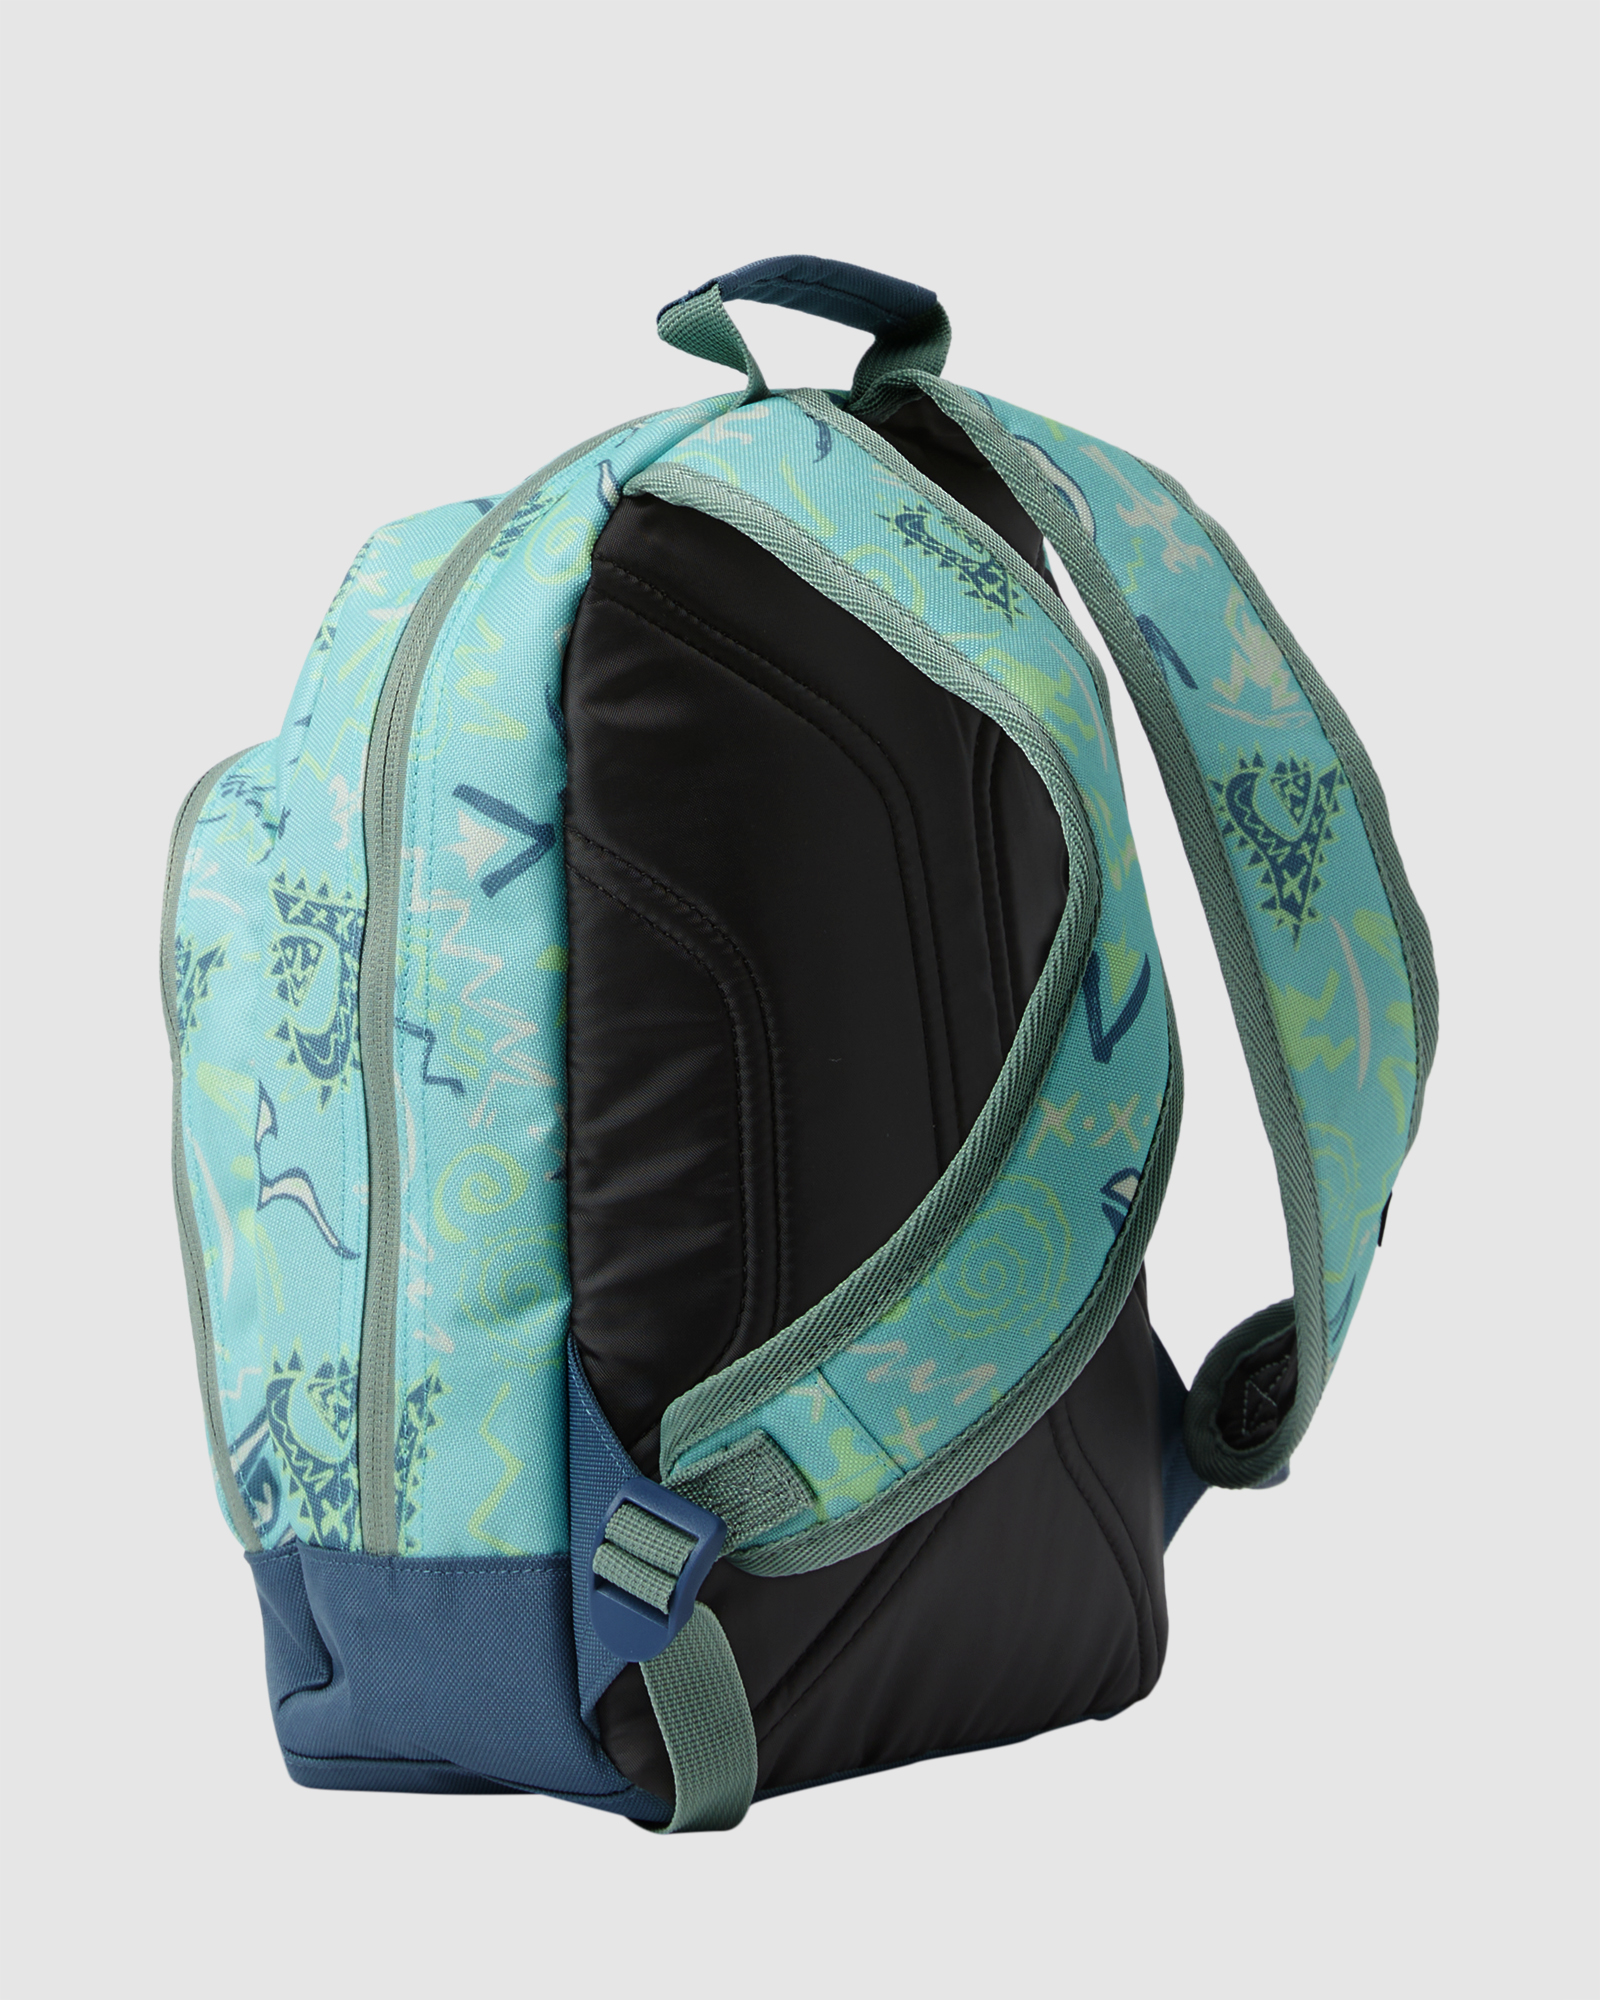 Quiksilver Chomping 12L Small Backpack - Pastel Turquoise SurfStitch 